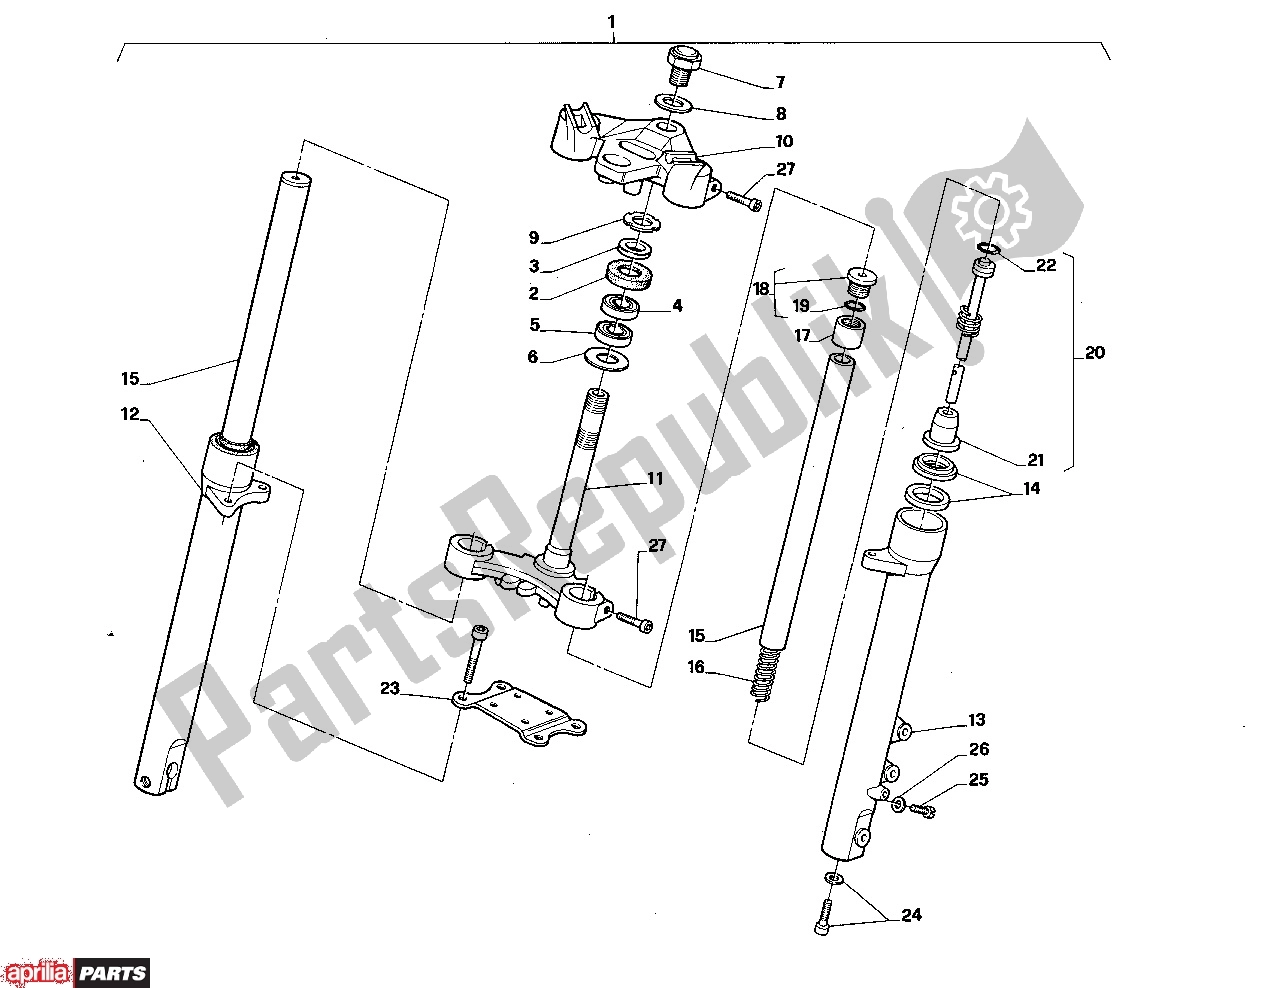 All parts for the Front Fork of the Aprilia AF1 Project 108 306 50 1988